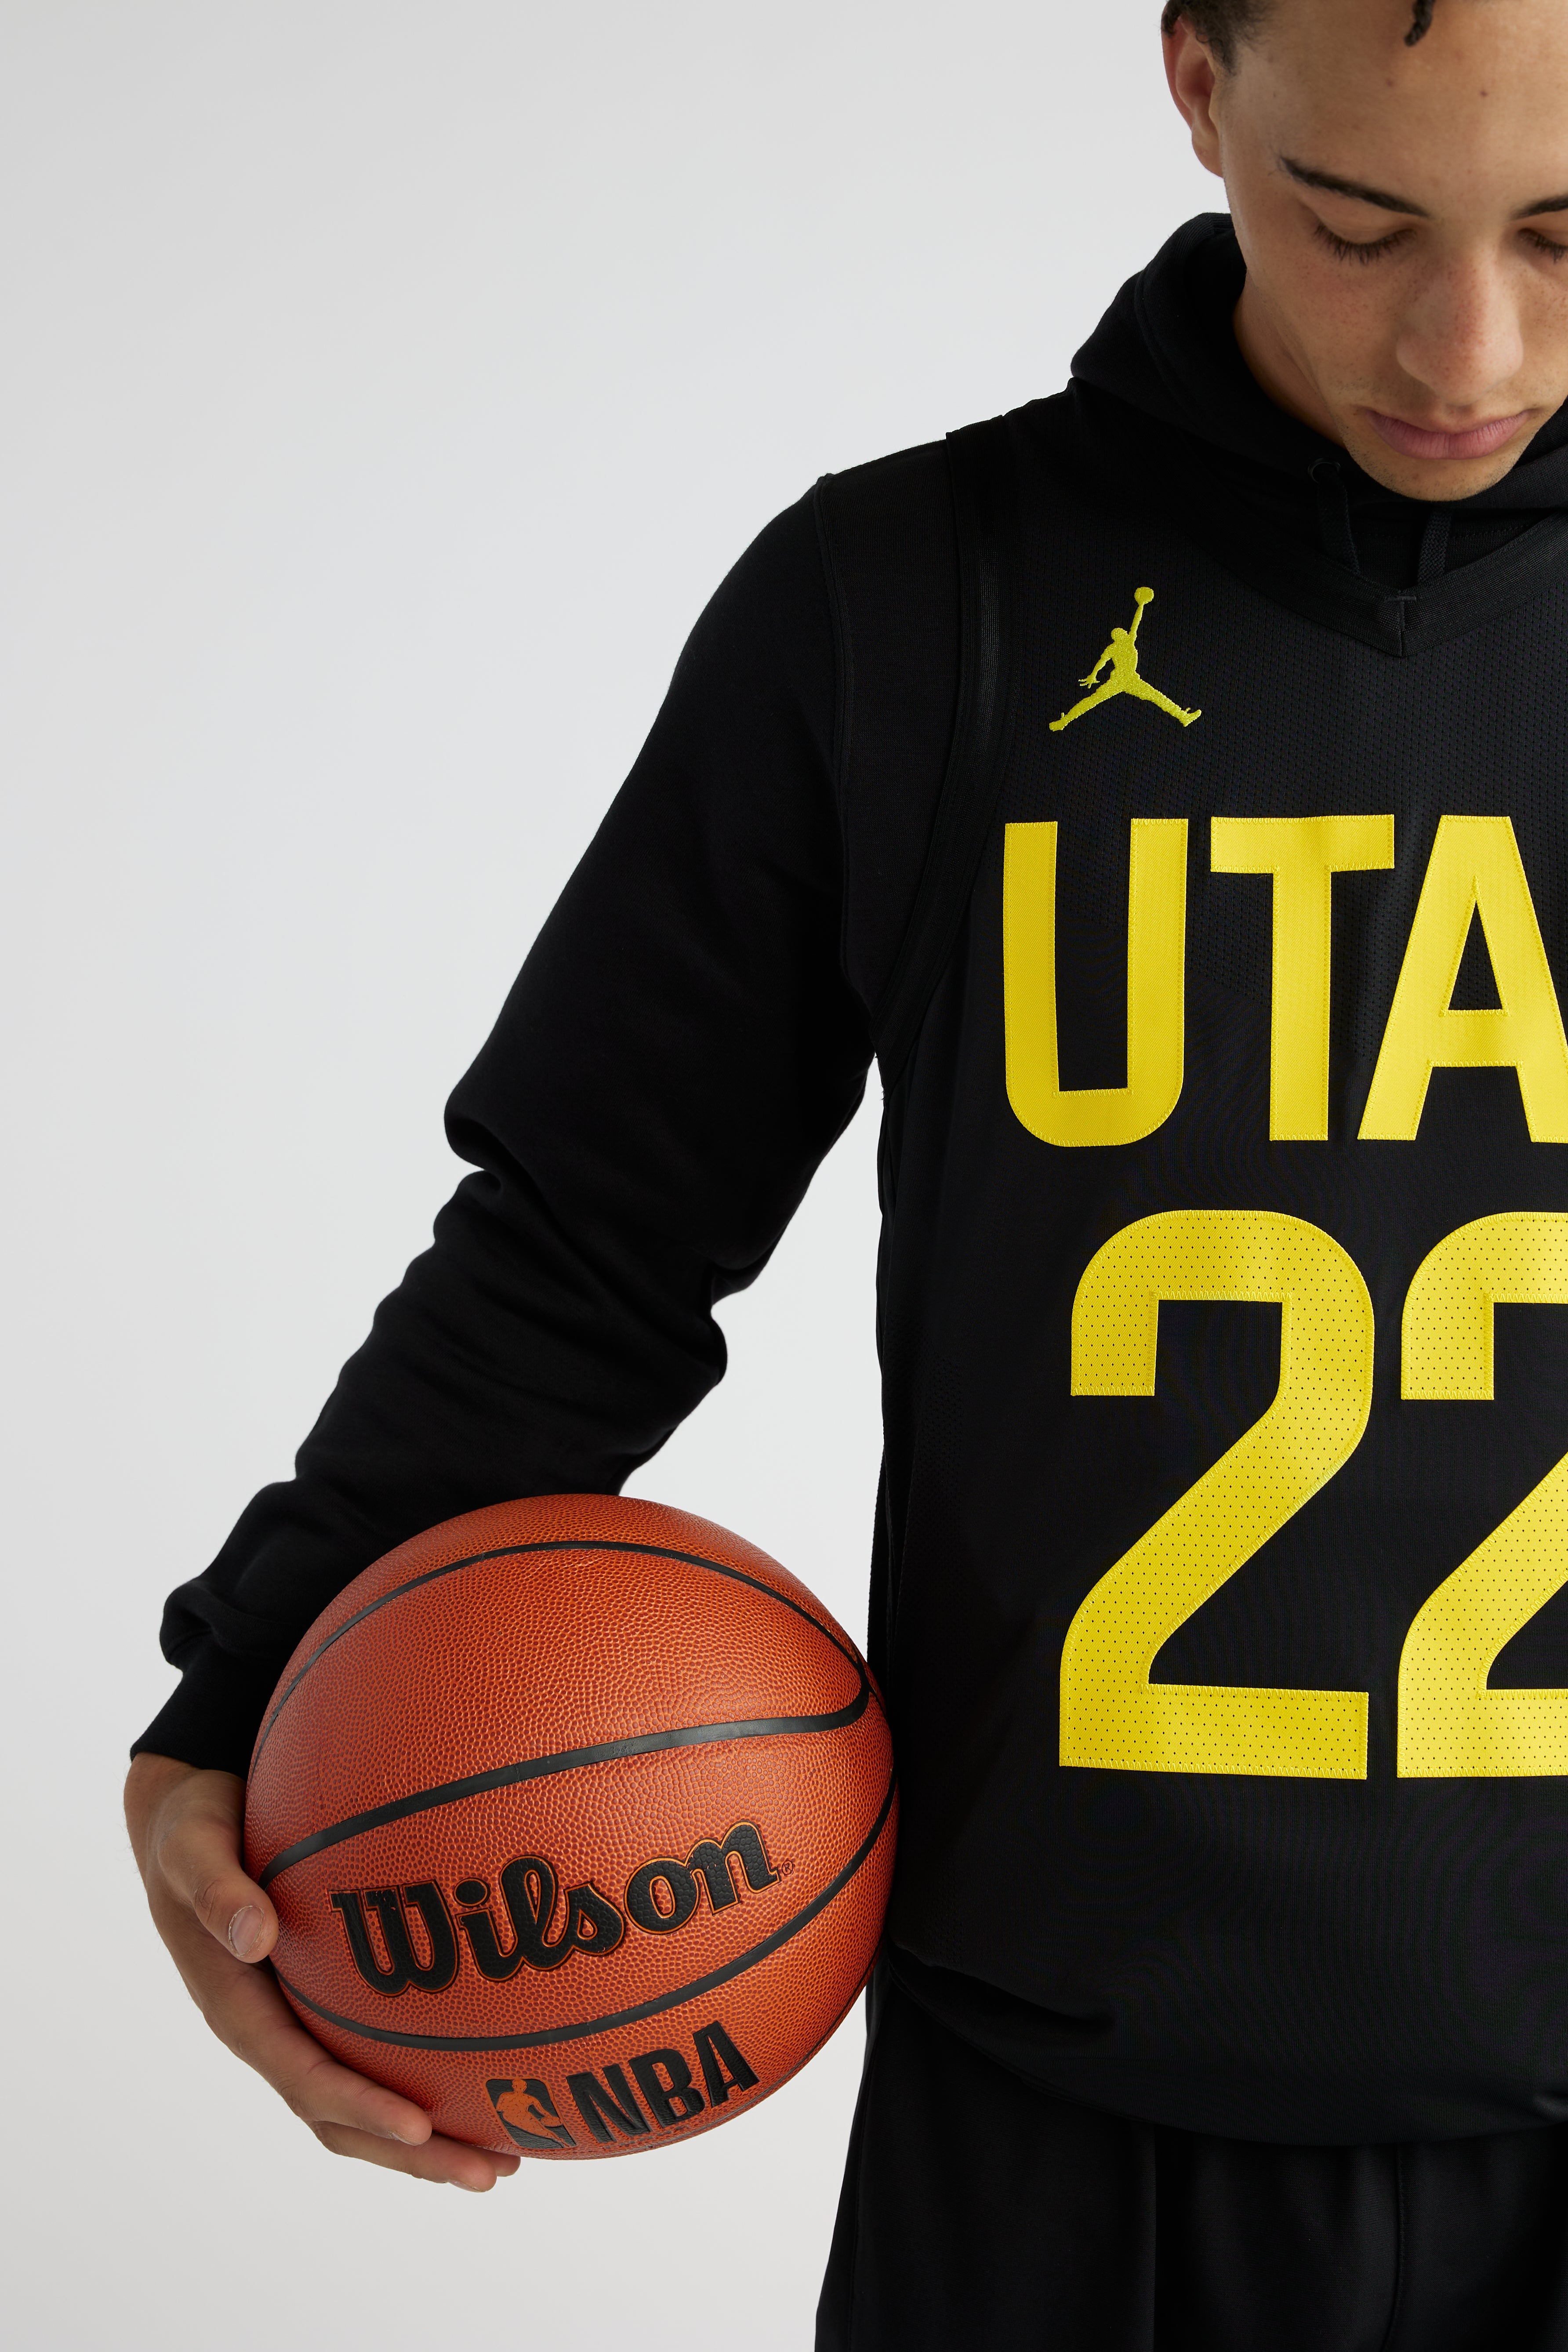 A man wearing the black Jordan jersey featuring the Jordan Jumpman logo on the upper right collar and the UTAH 22 in yellow.